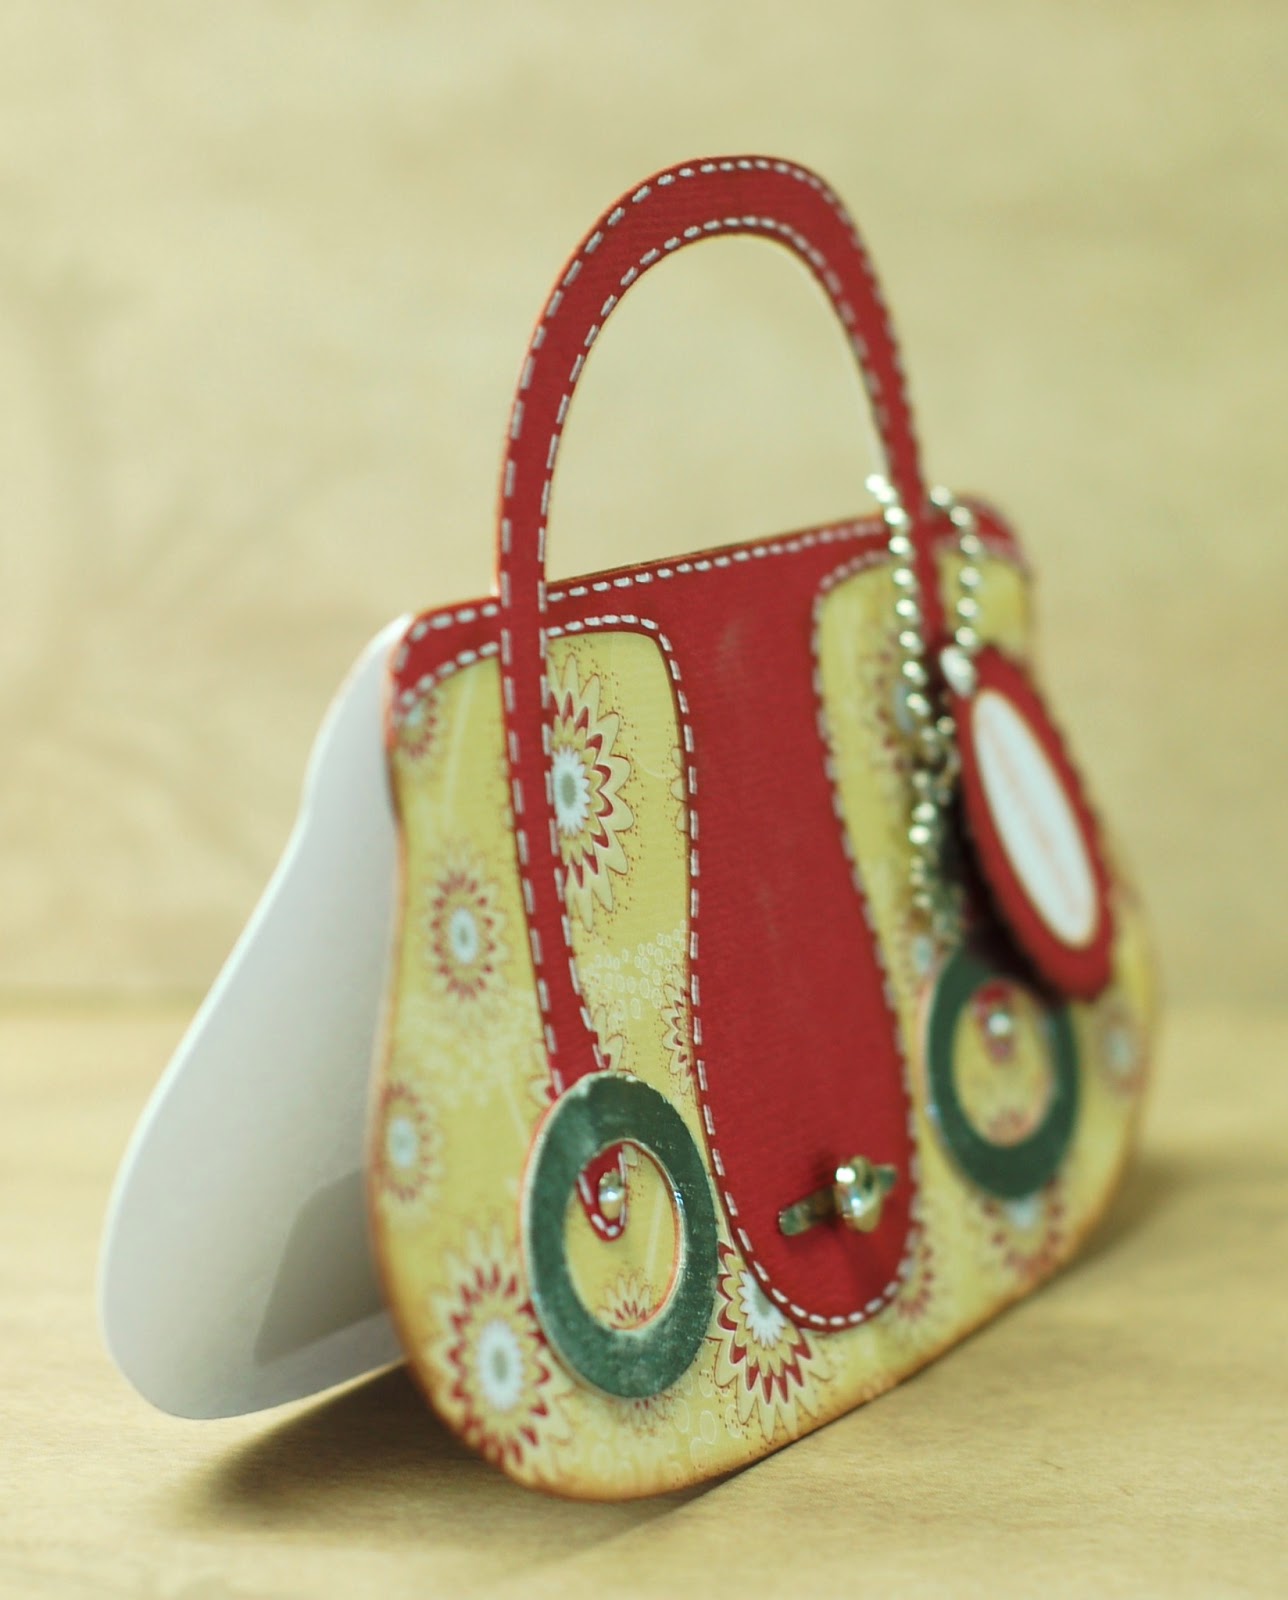 Paper Creations by Kristin: Purse Shaped Cards